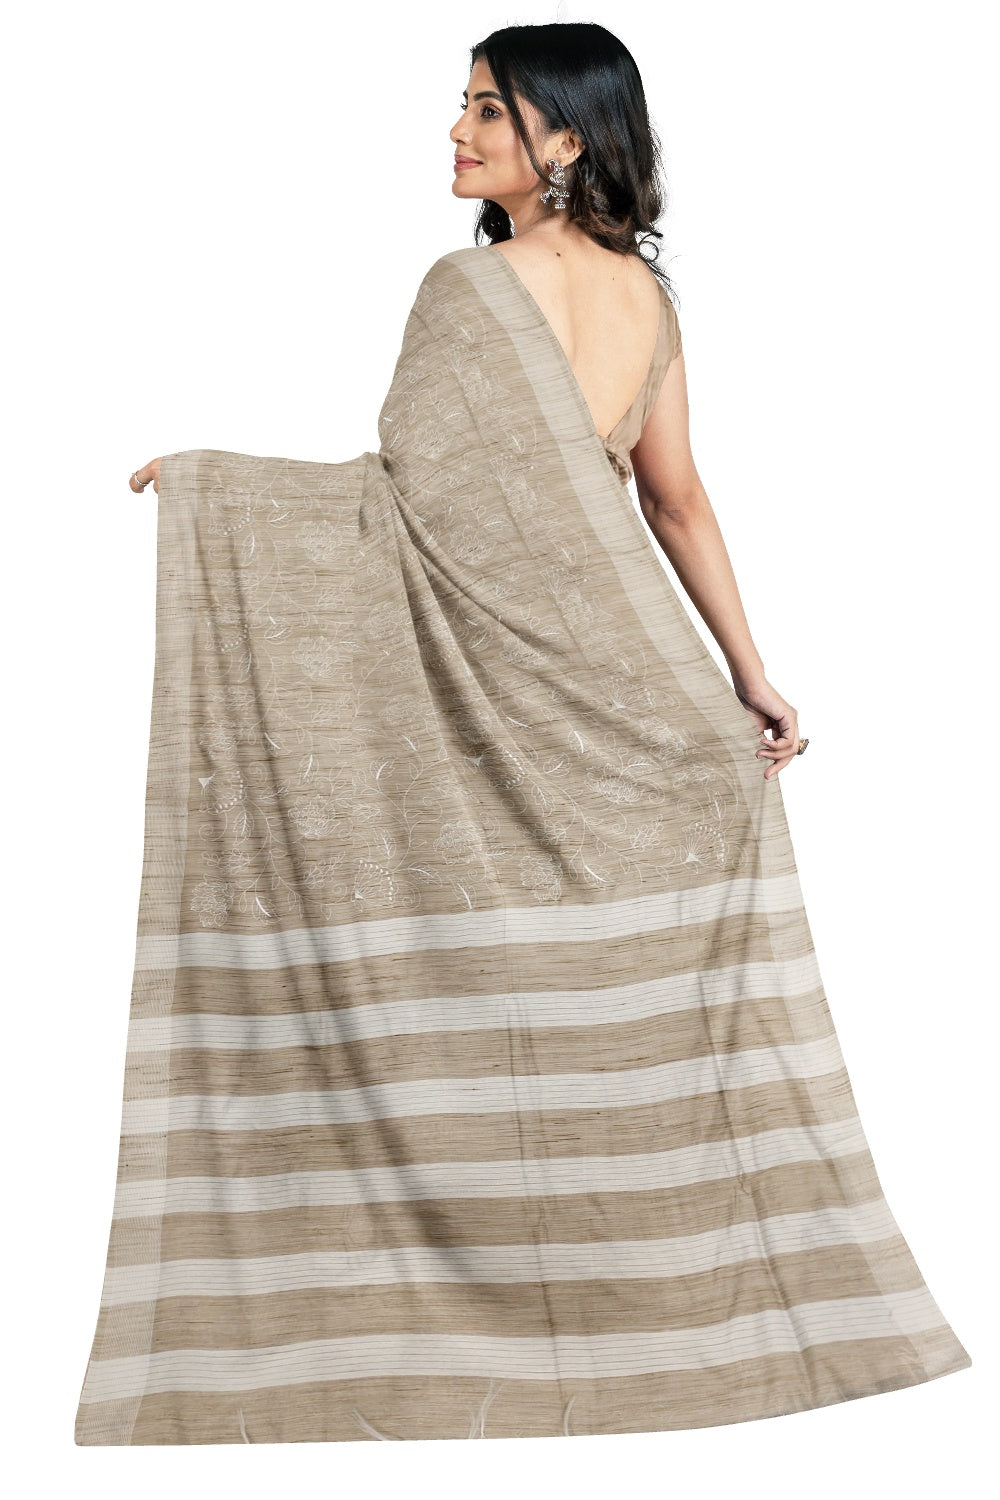 Southloom Cotton Grey Designer Saree with Embroidery Work